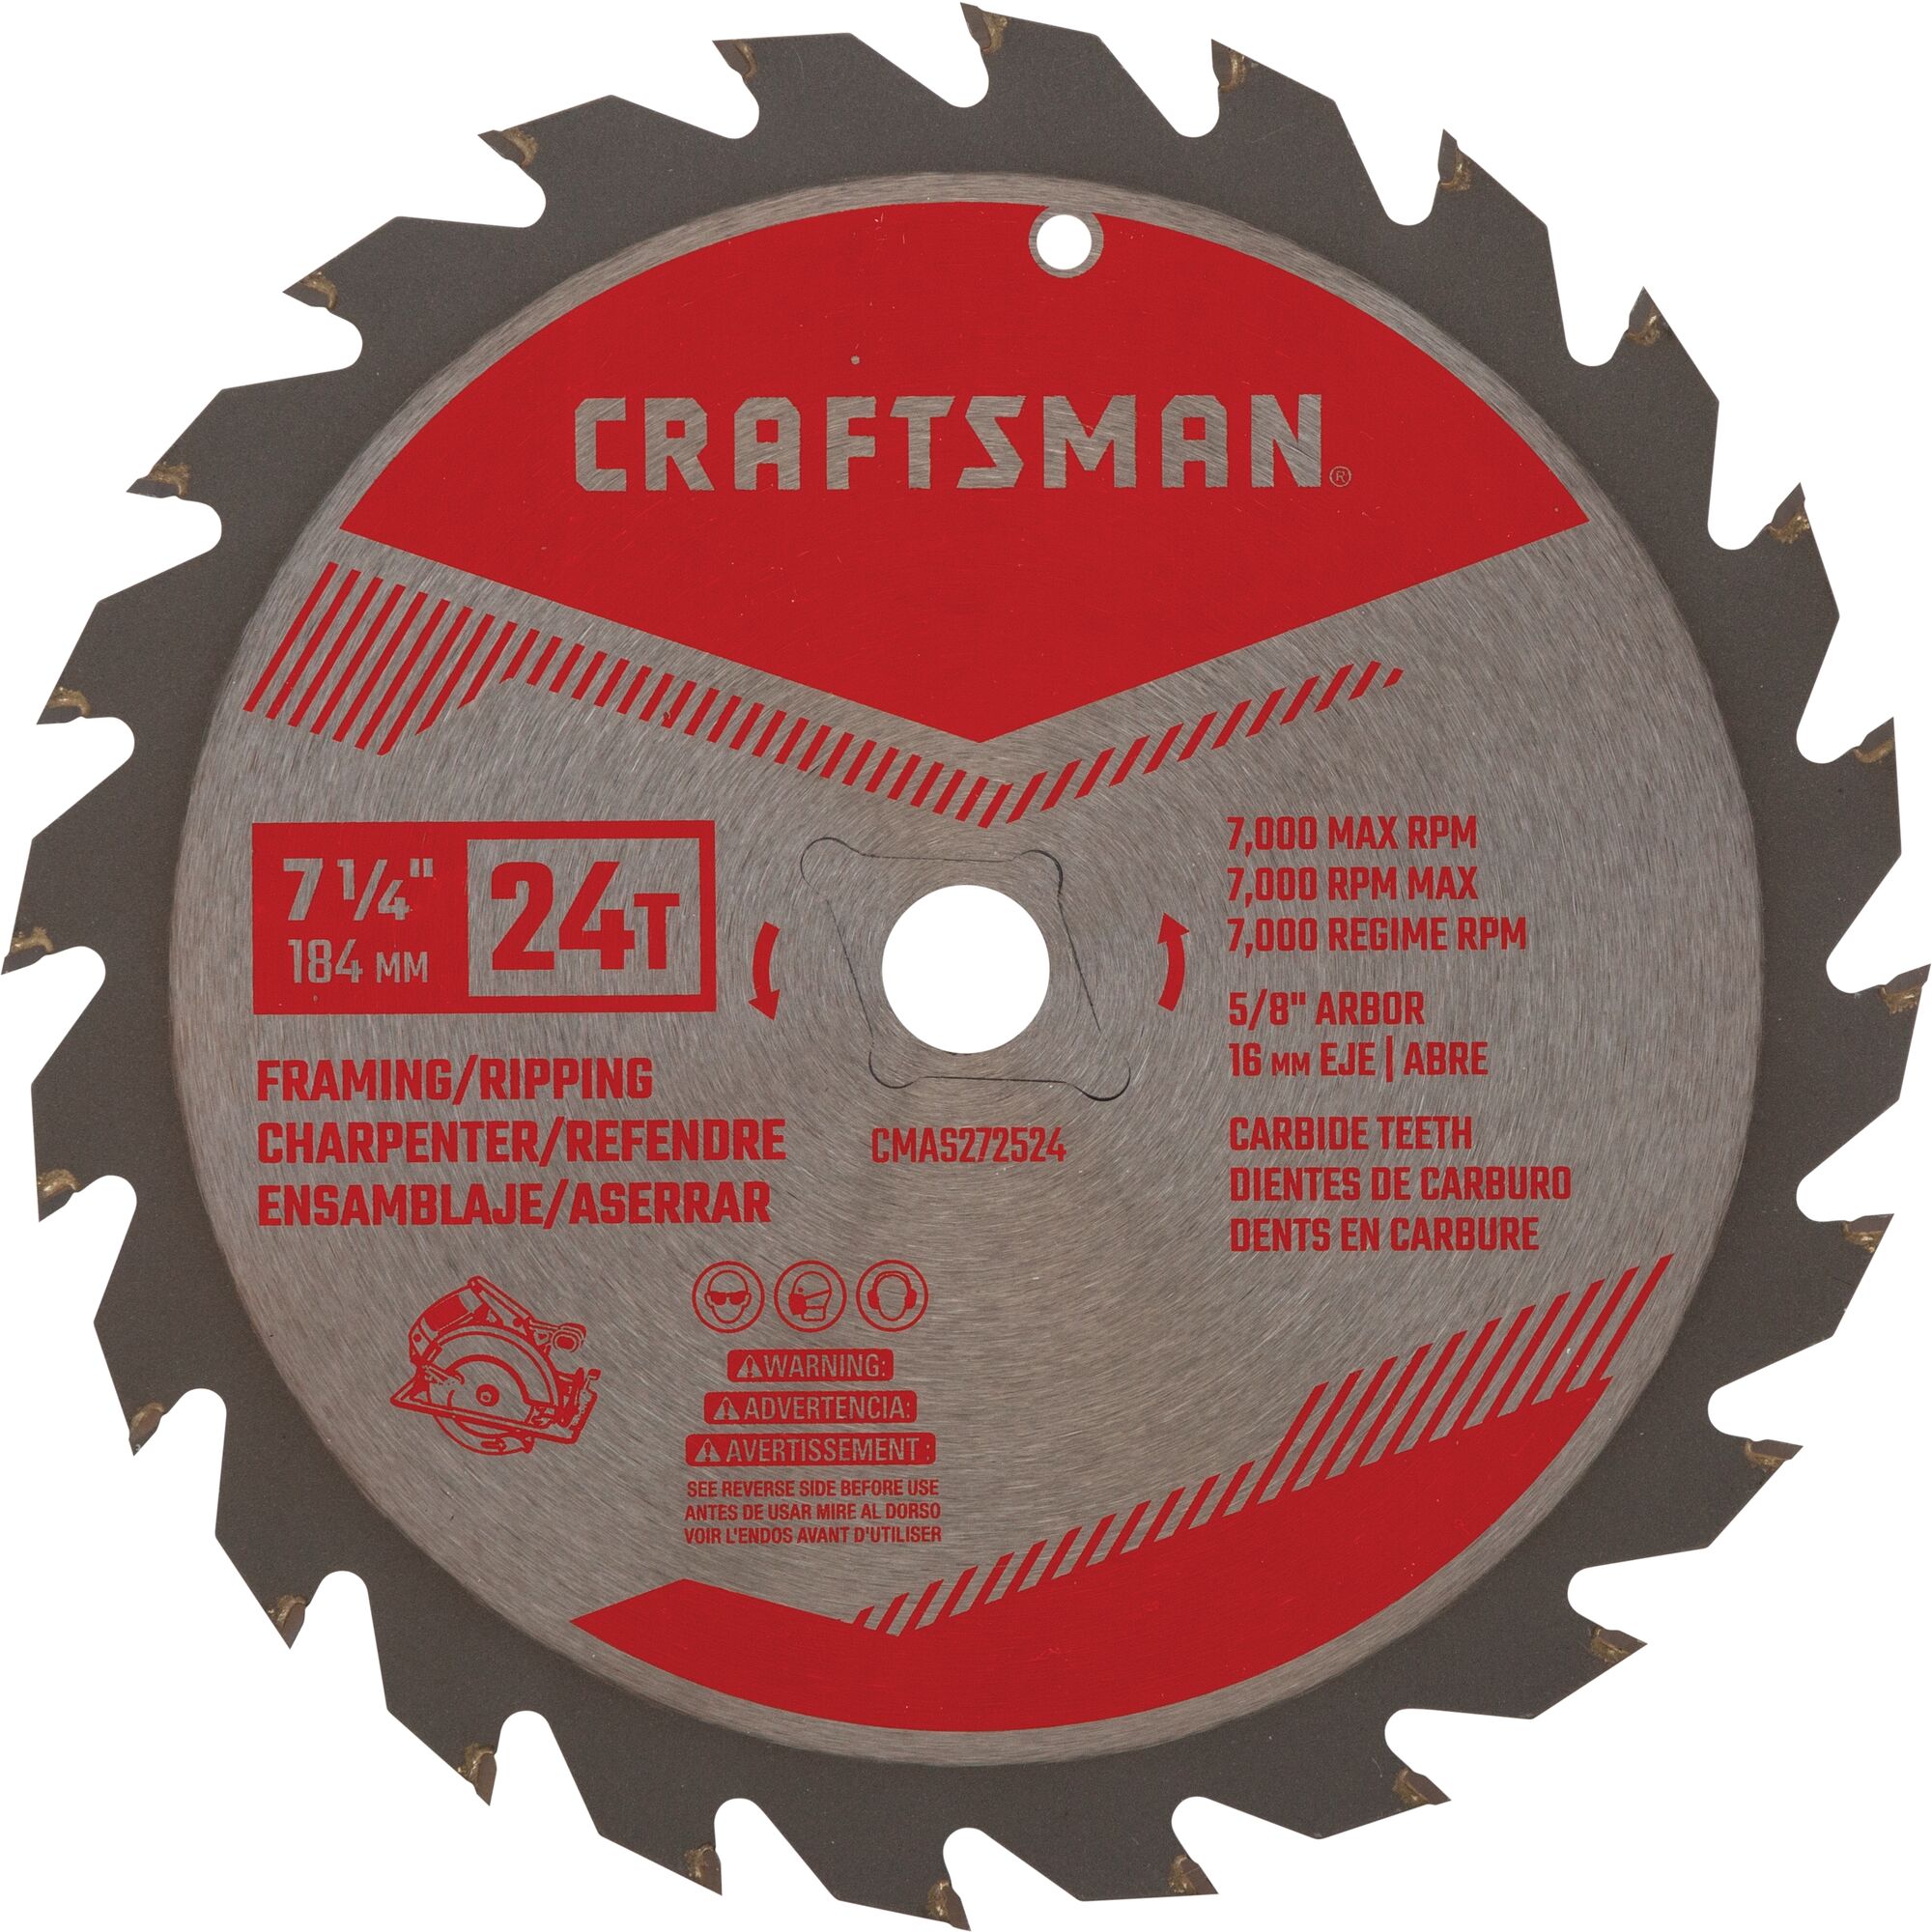 7 and a quarter inch 24 tooth framing ripping saw blade.